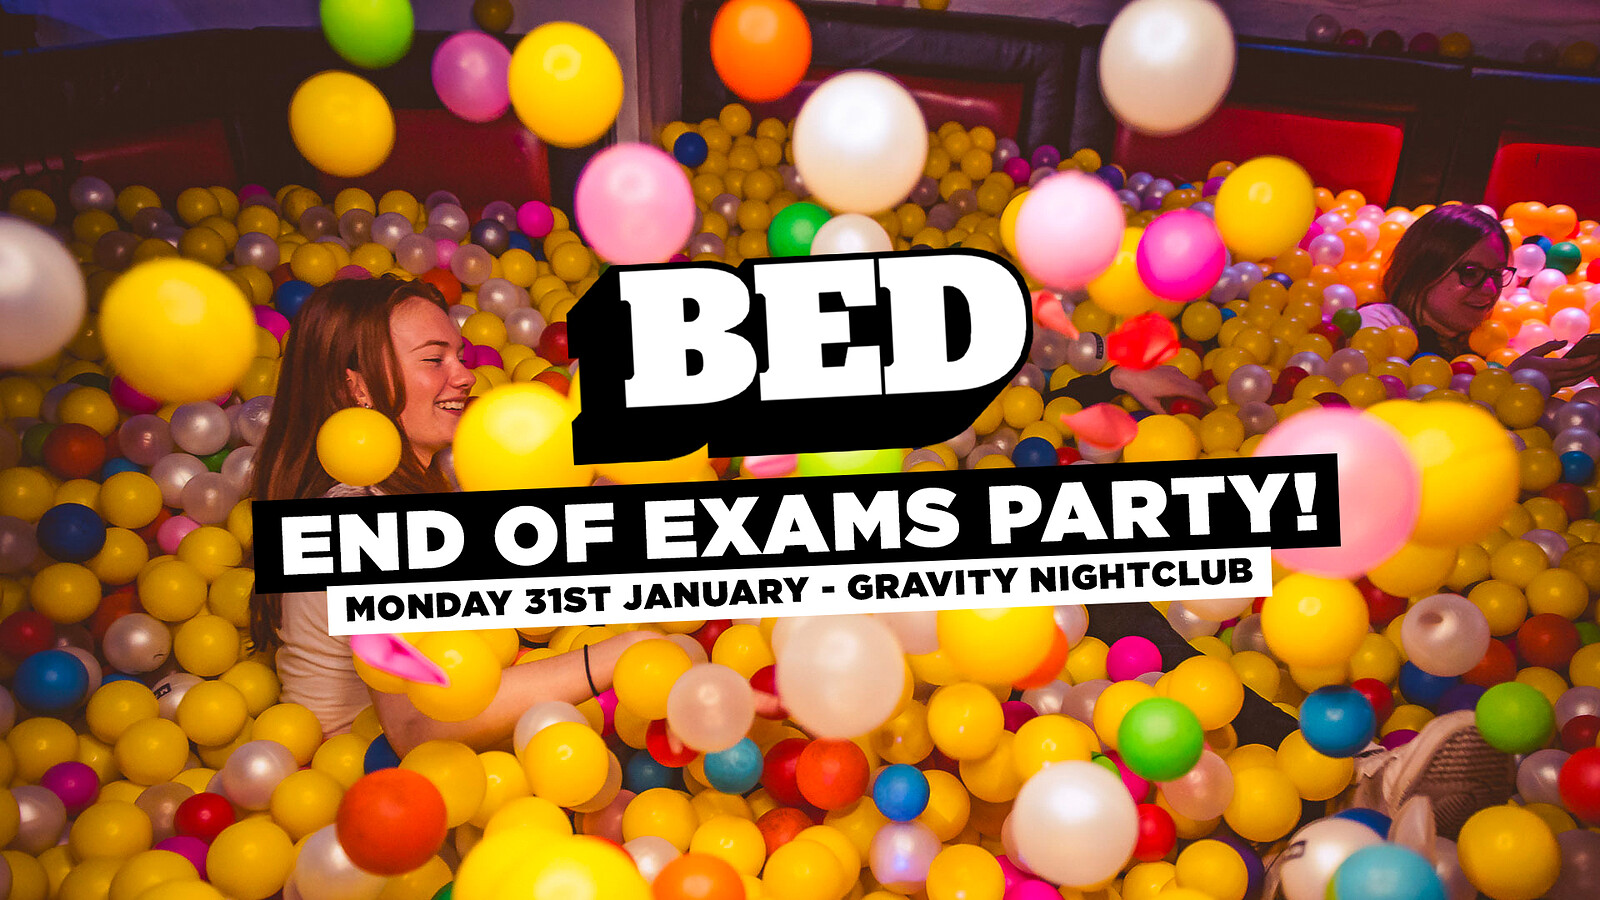 BED: End of Exams Party at Gravity